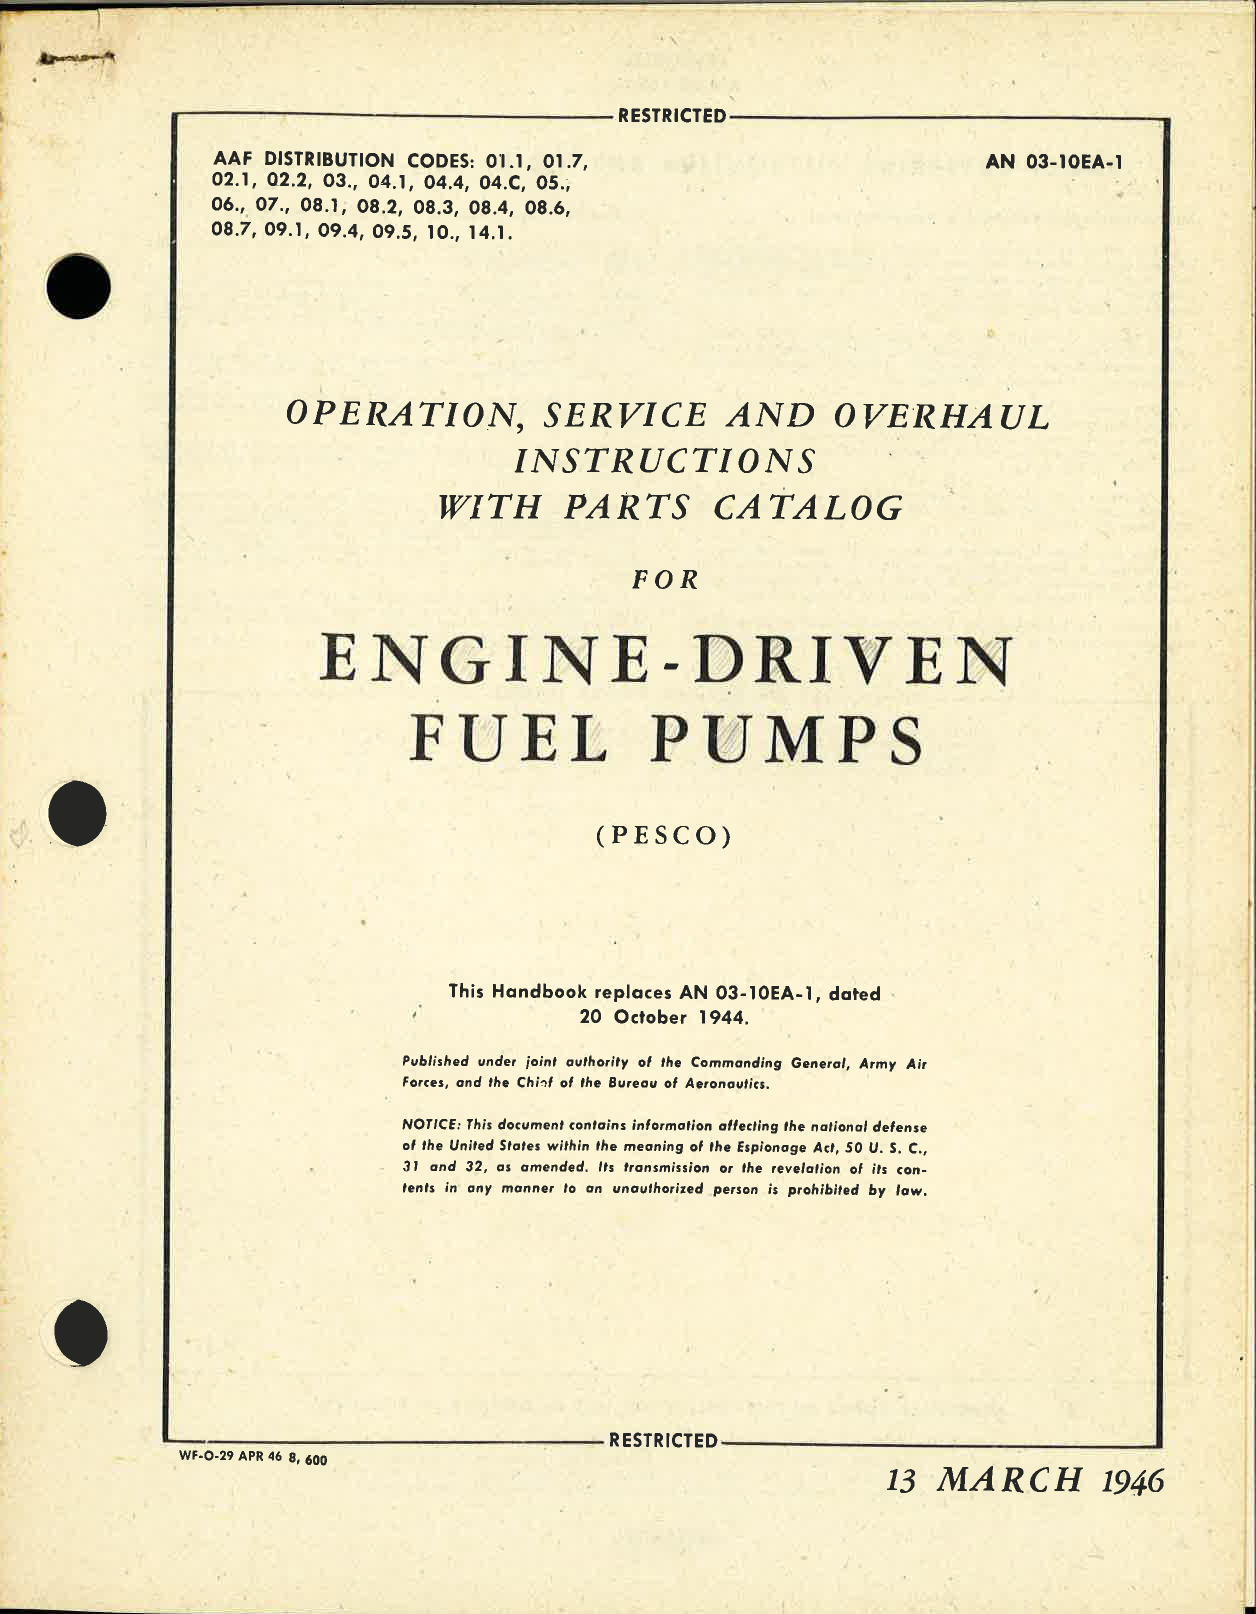 Sample page 7 from AirCorps Library document: Handbook of Instructions with Parts Catalog for Engine-Driven Fuel Pumps